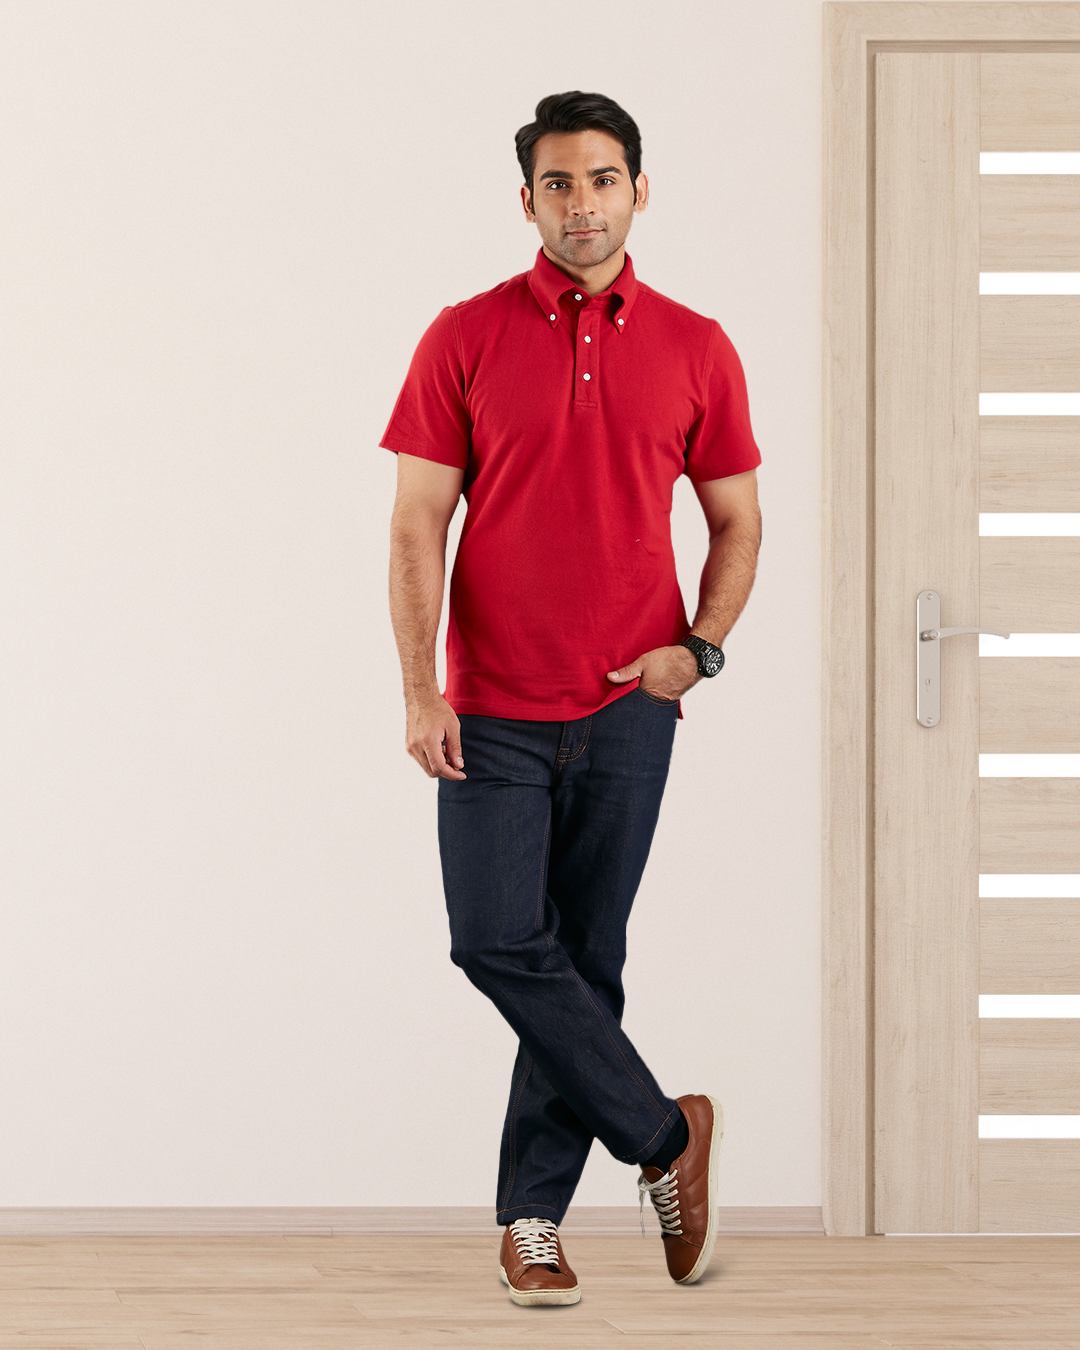 Model wearing the custom oxford polo shirt for men by Luxire in red one hand in pocket